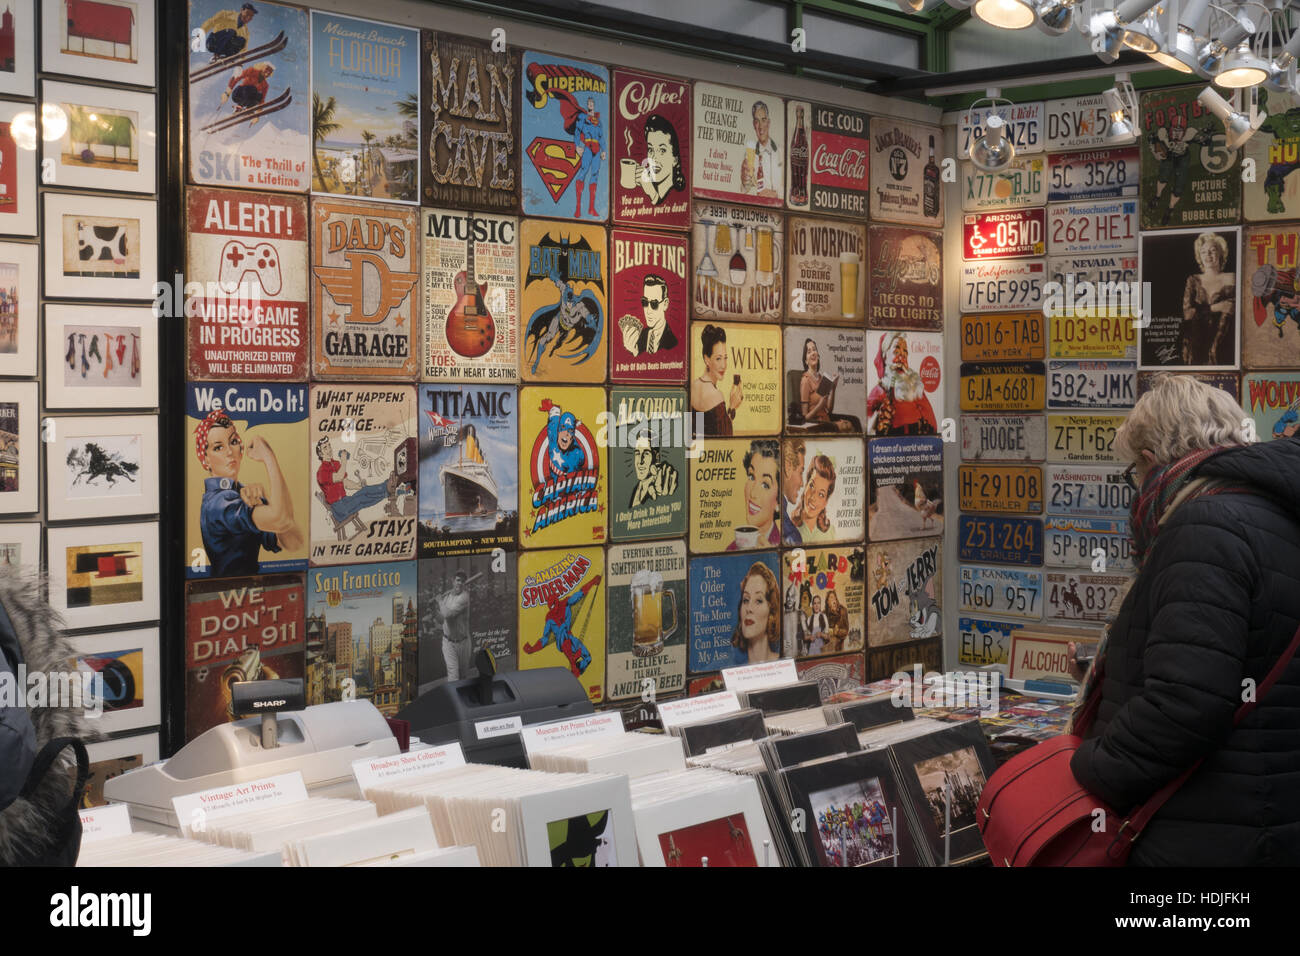 Replicas of old posters and license plates for sale as presents during the holiday season in New York City. Stock Photo